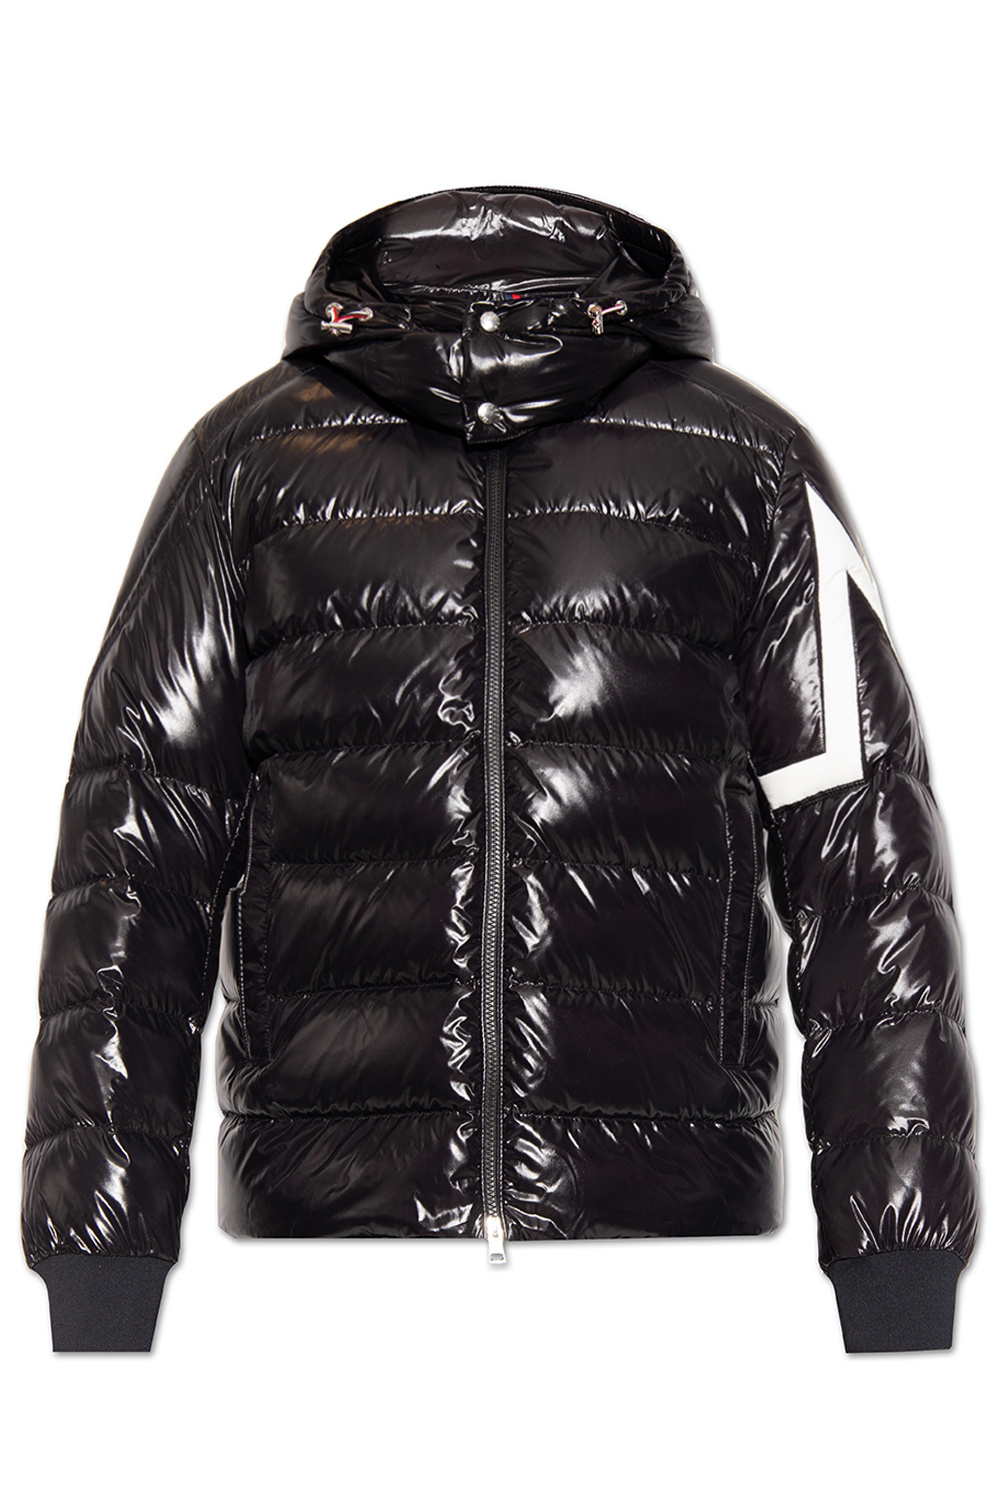 Moncler ‘Corydale’ hooded down Joma jacket